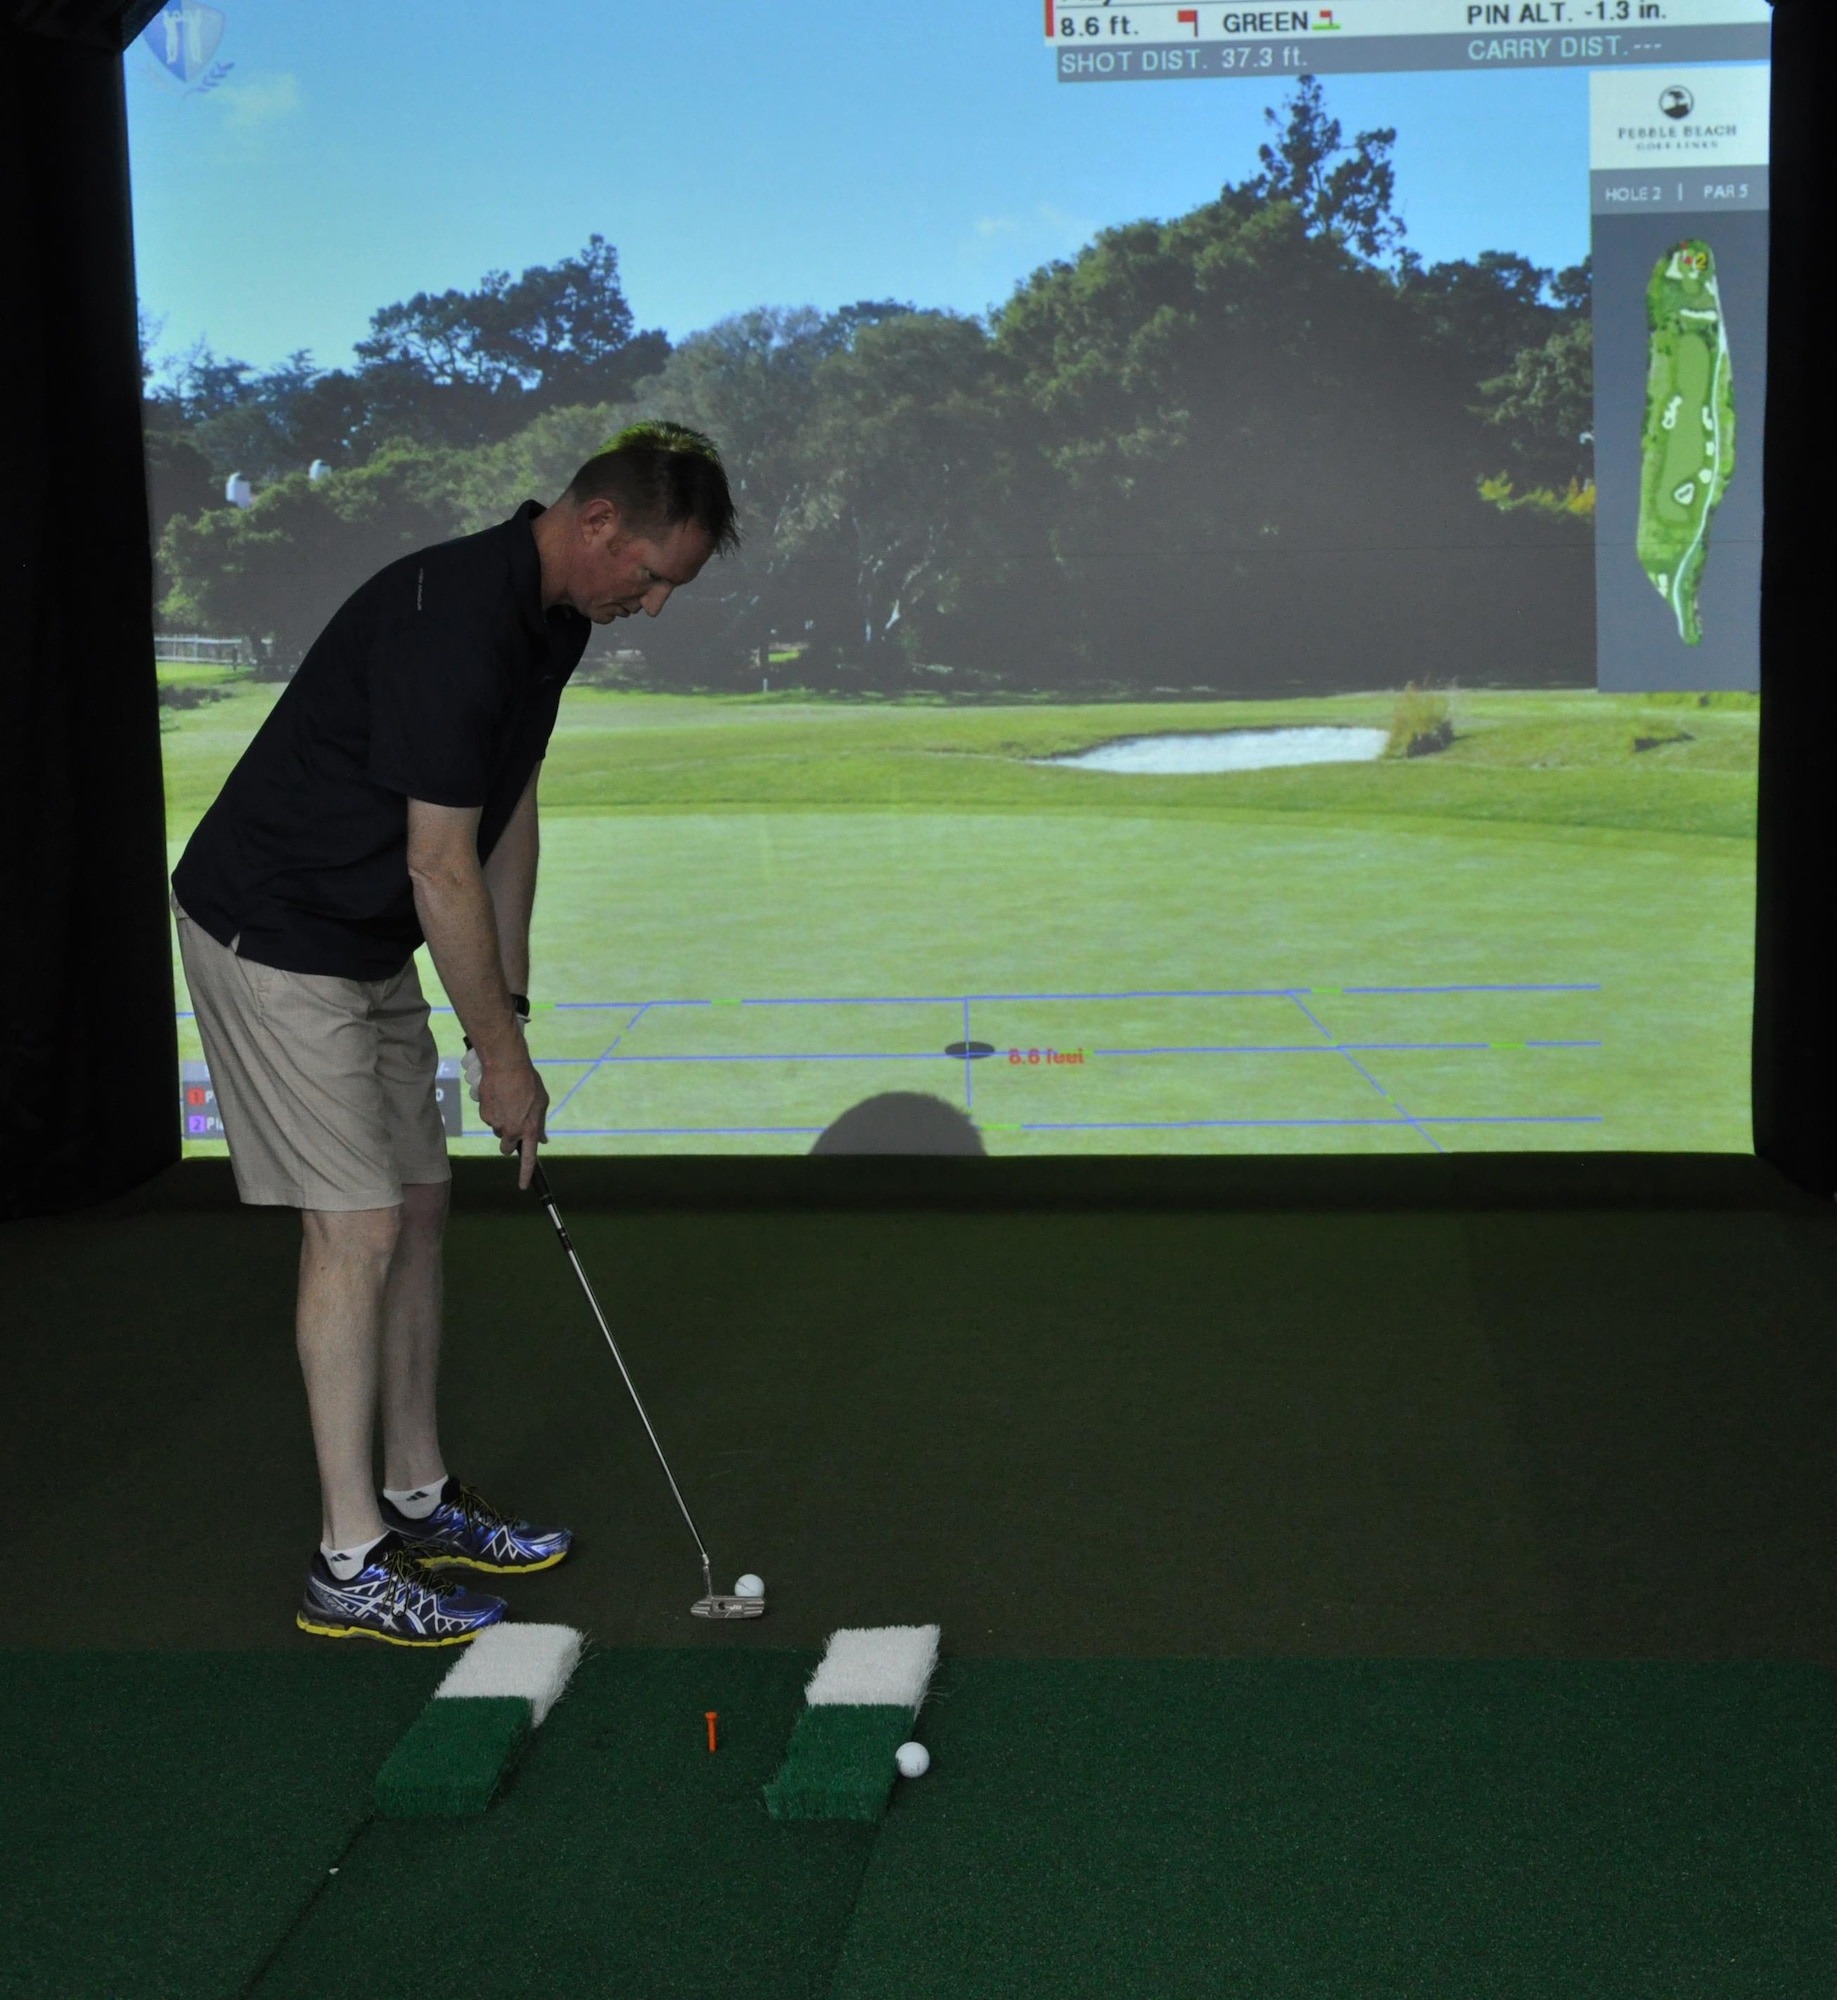 Golf simulator opens at AUAB > U.S. Air Forces Central > Article Display